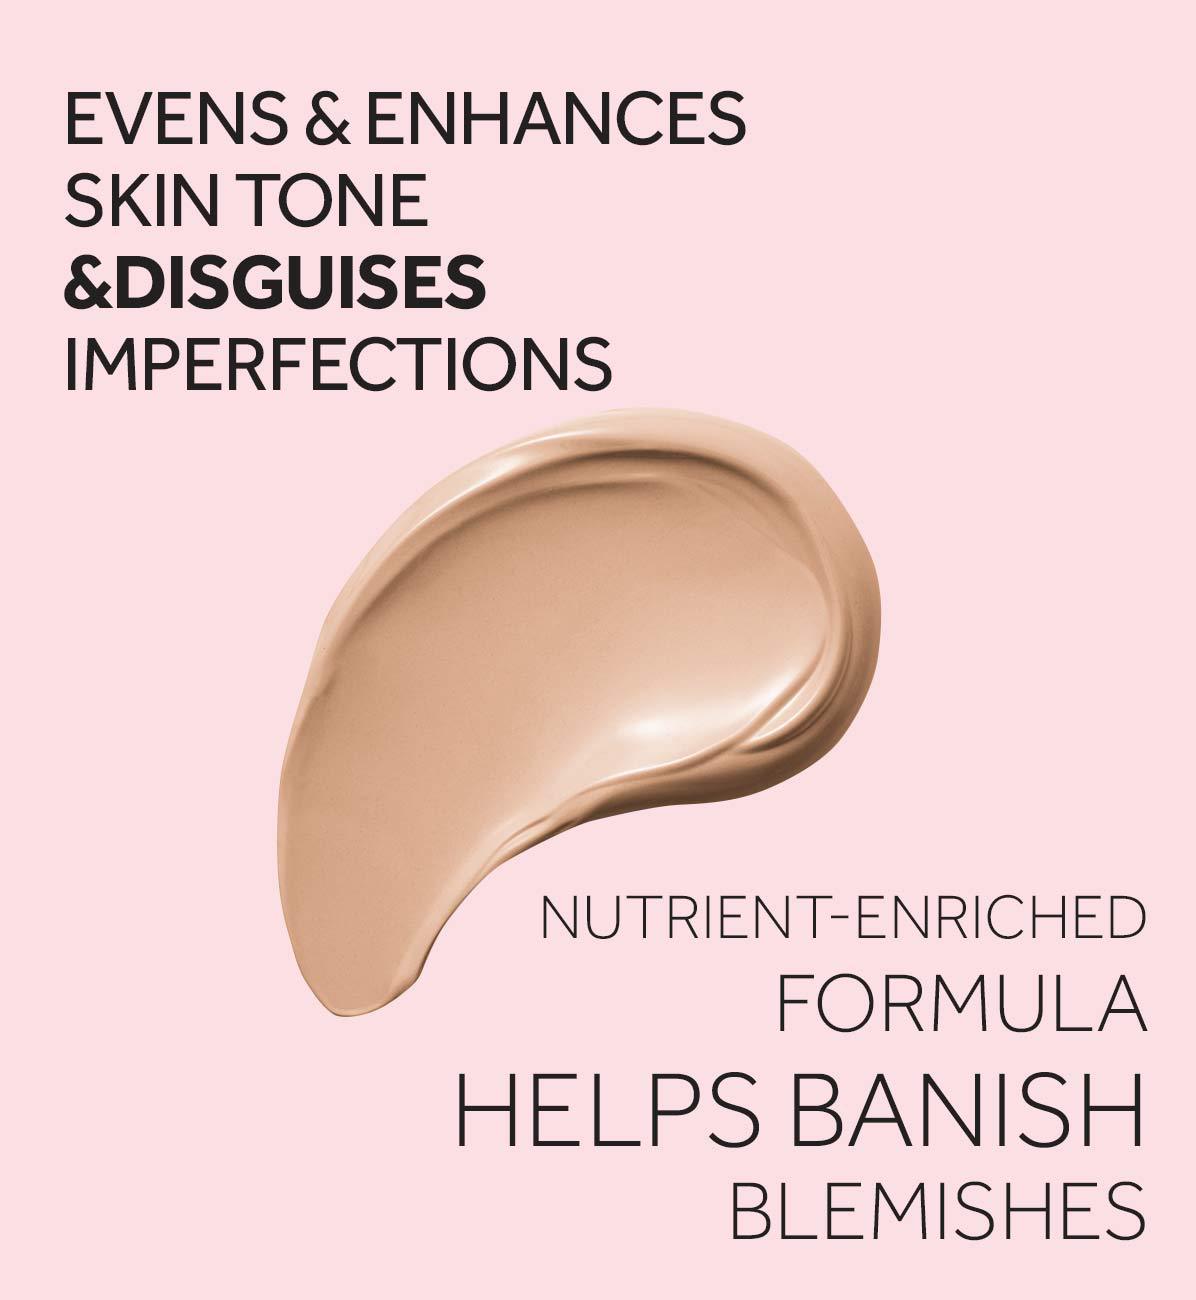 Evens and Enhance skin tone and disguises imperfections. Nutrient-enriched formula helps banish blemishes